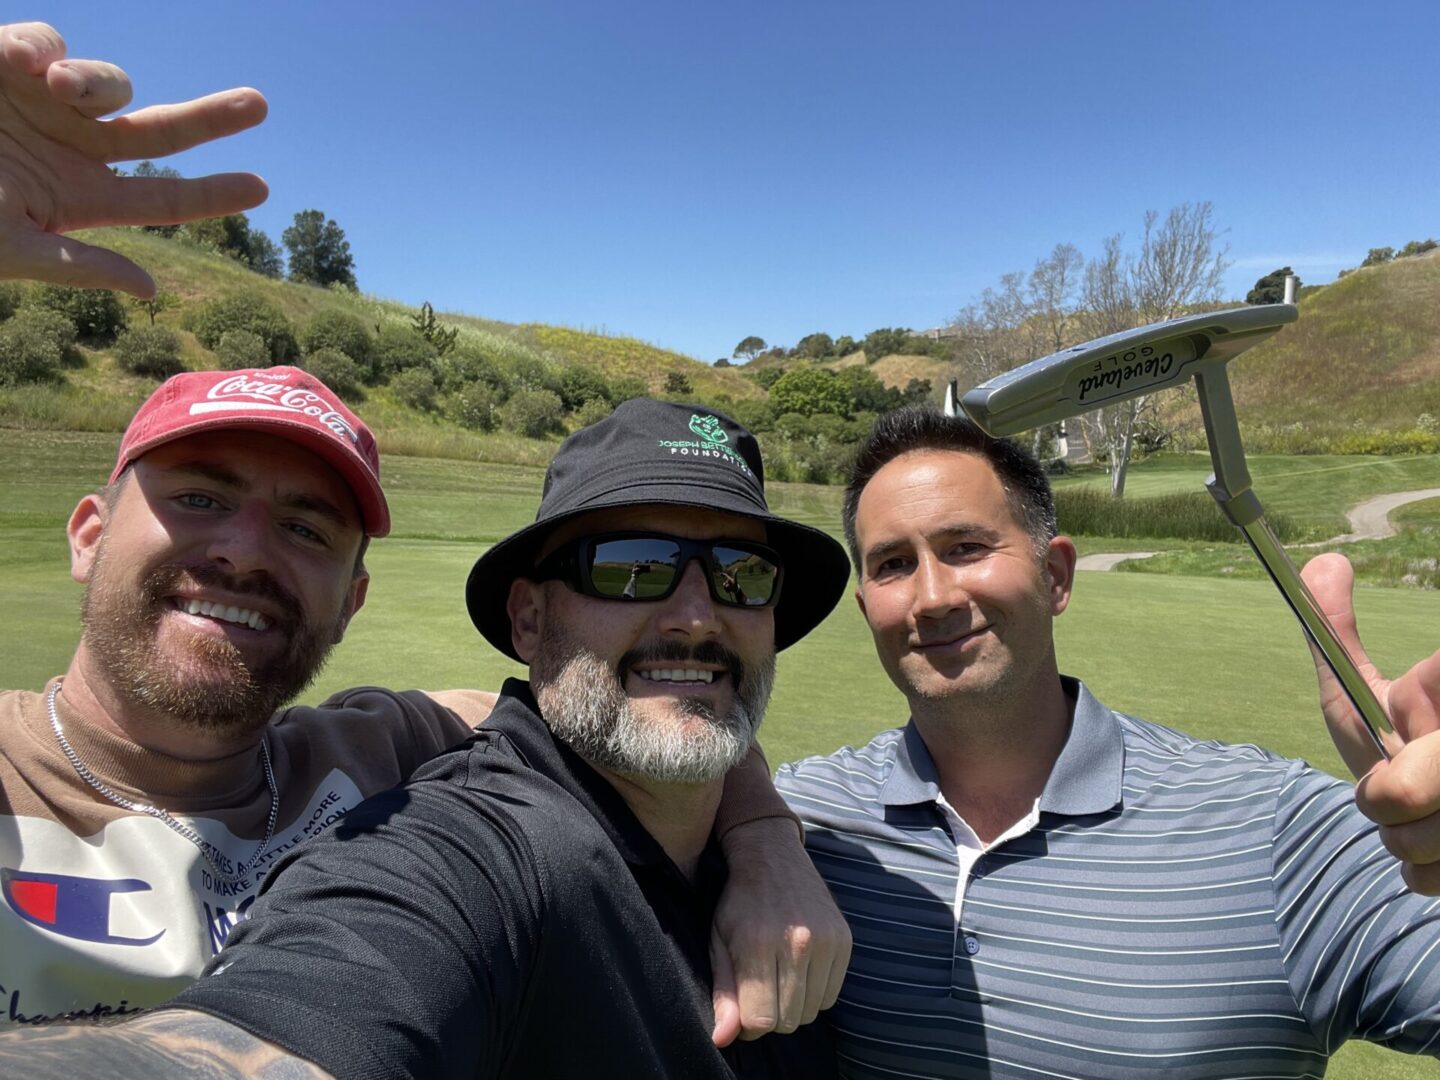 Three men pose for a picture on the golf course.